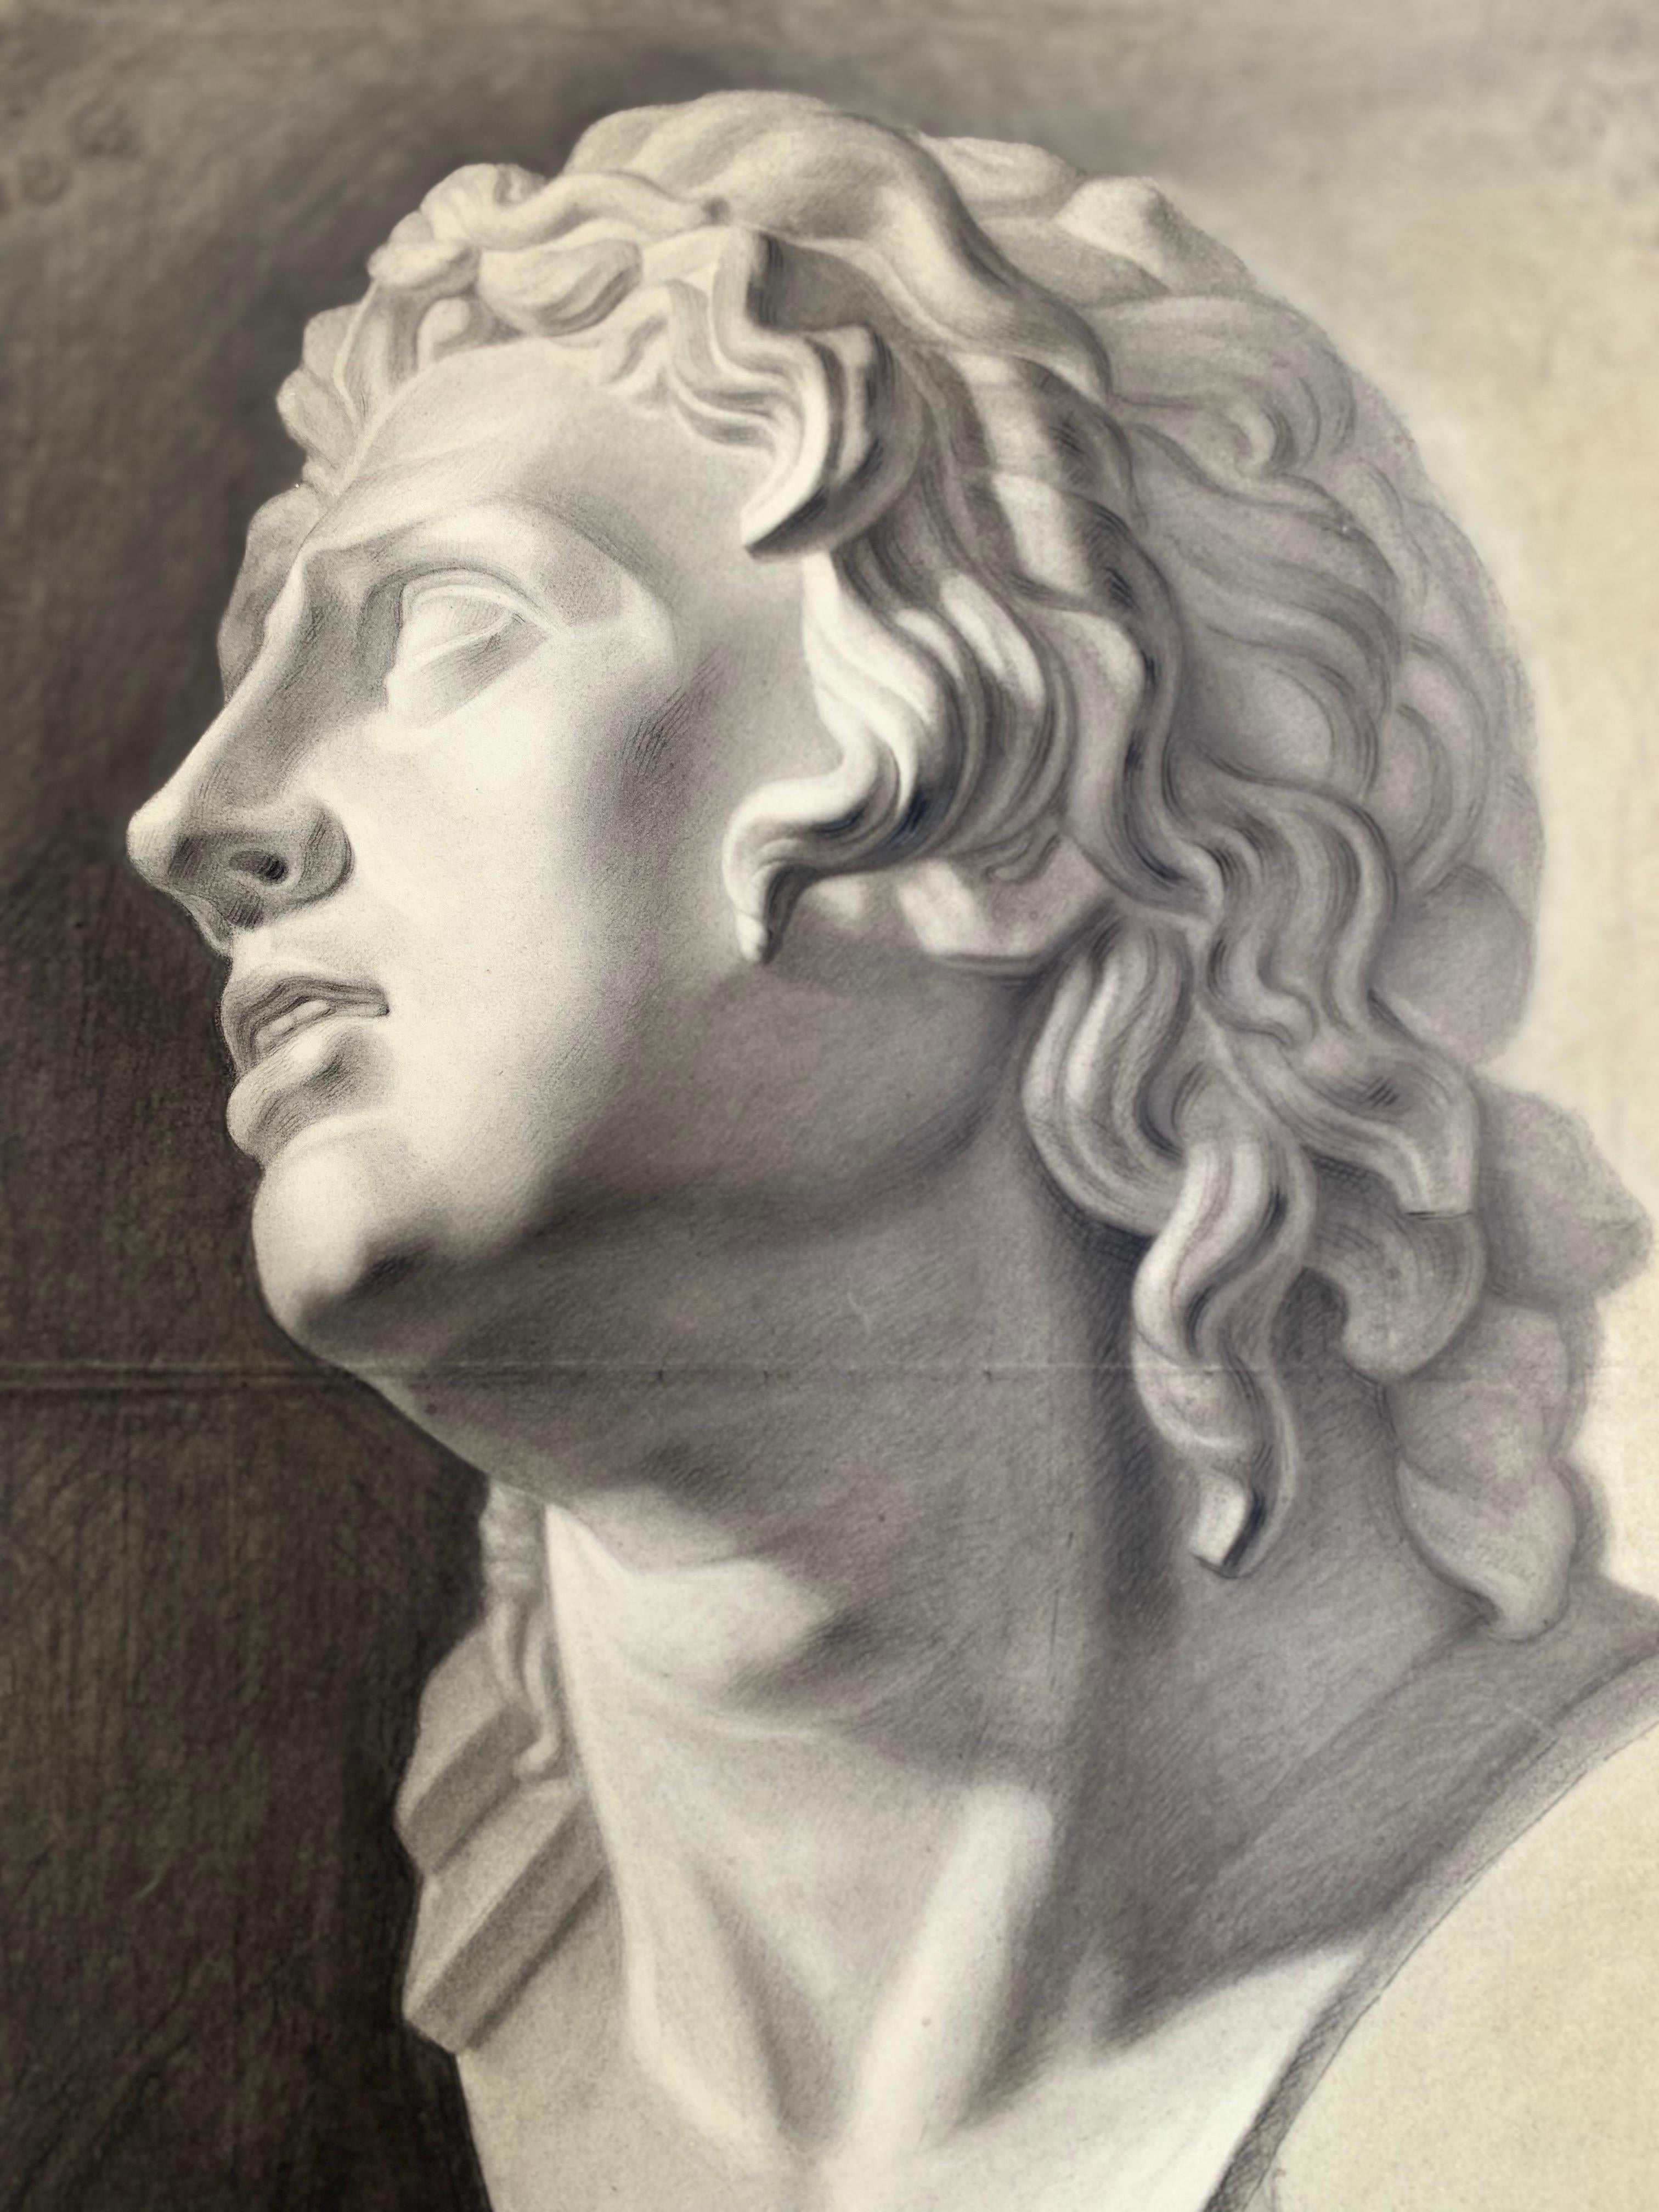 Unknown Figurative Art - Large XIXth cent. Academic drawing of Alexander The Great’s bust from Uffizi. 